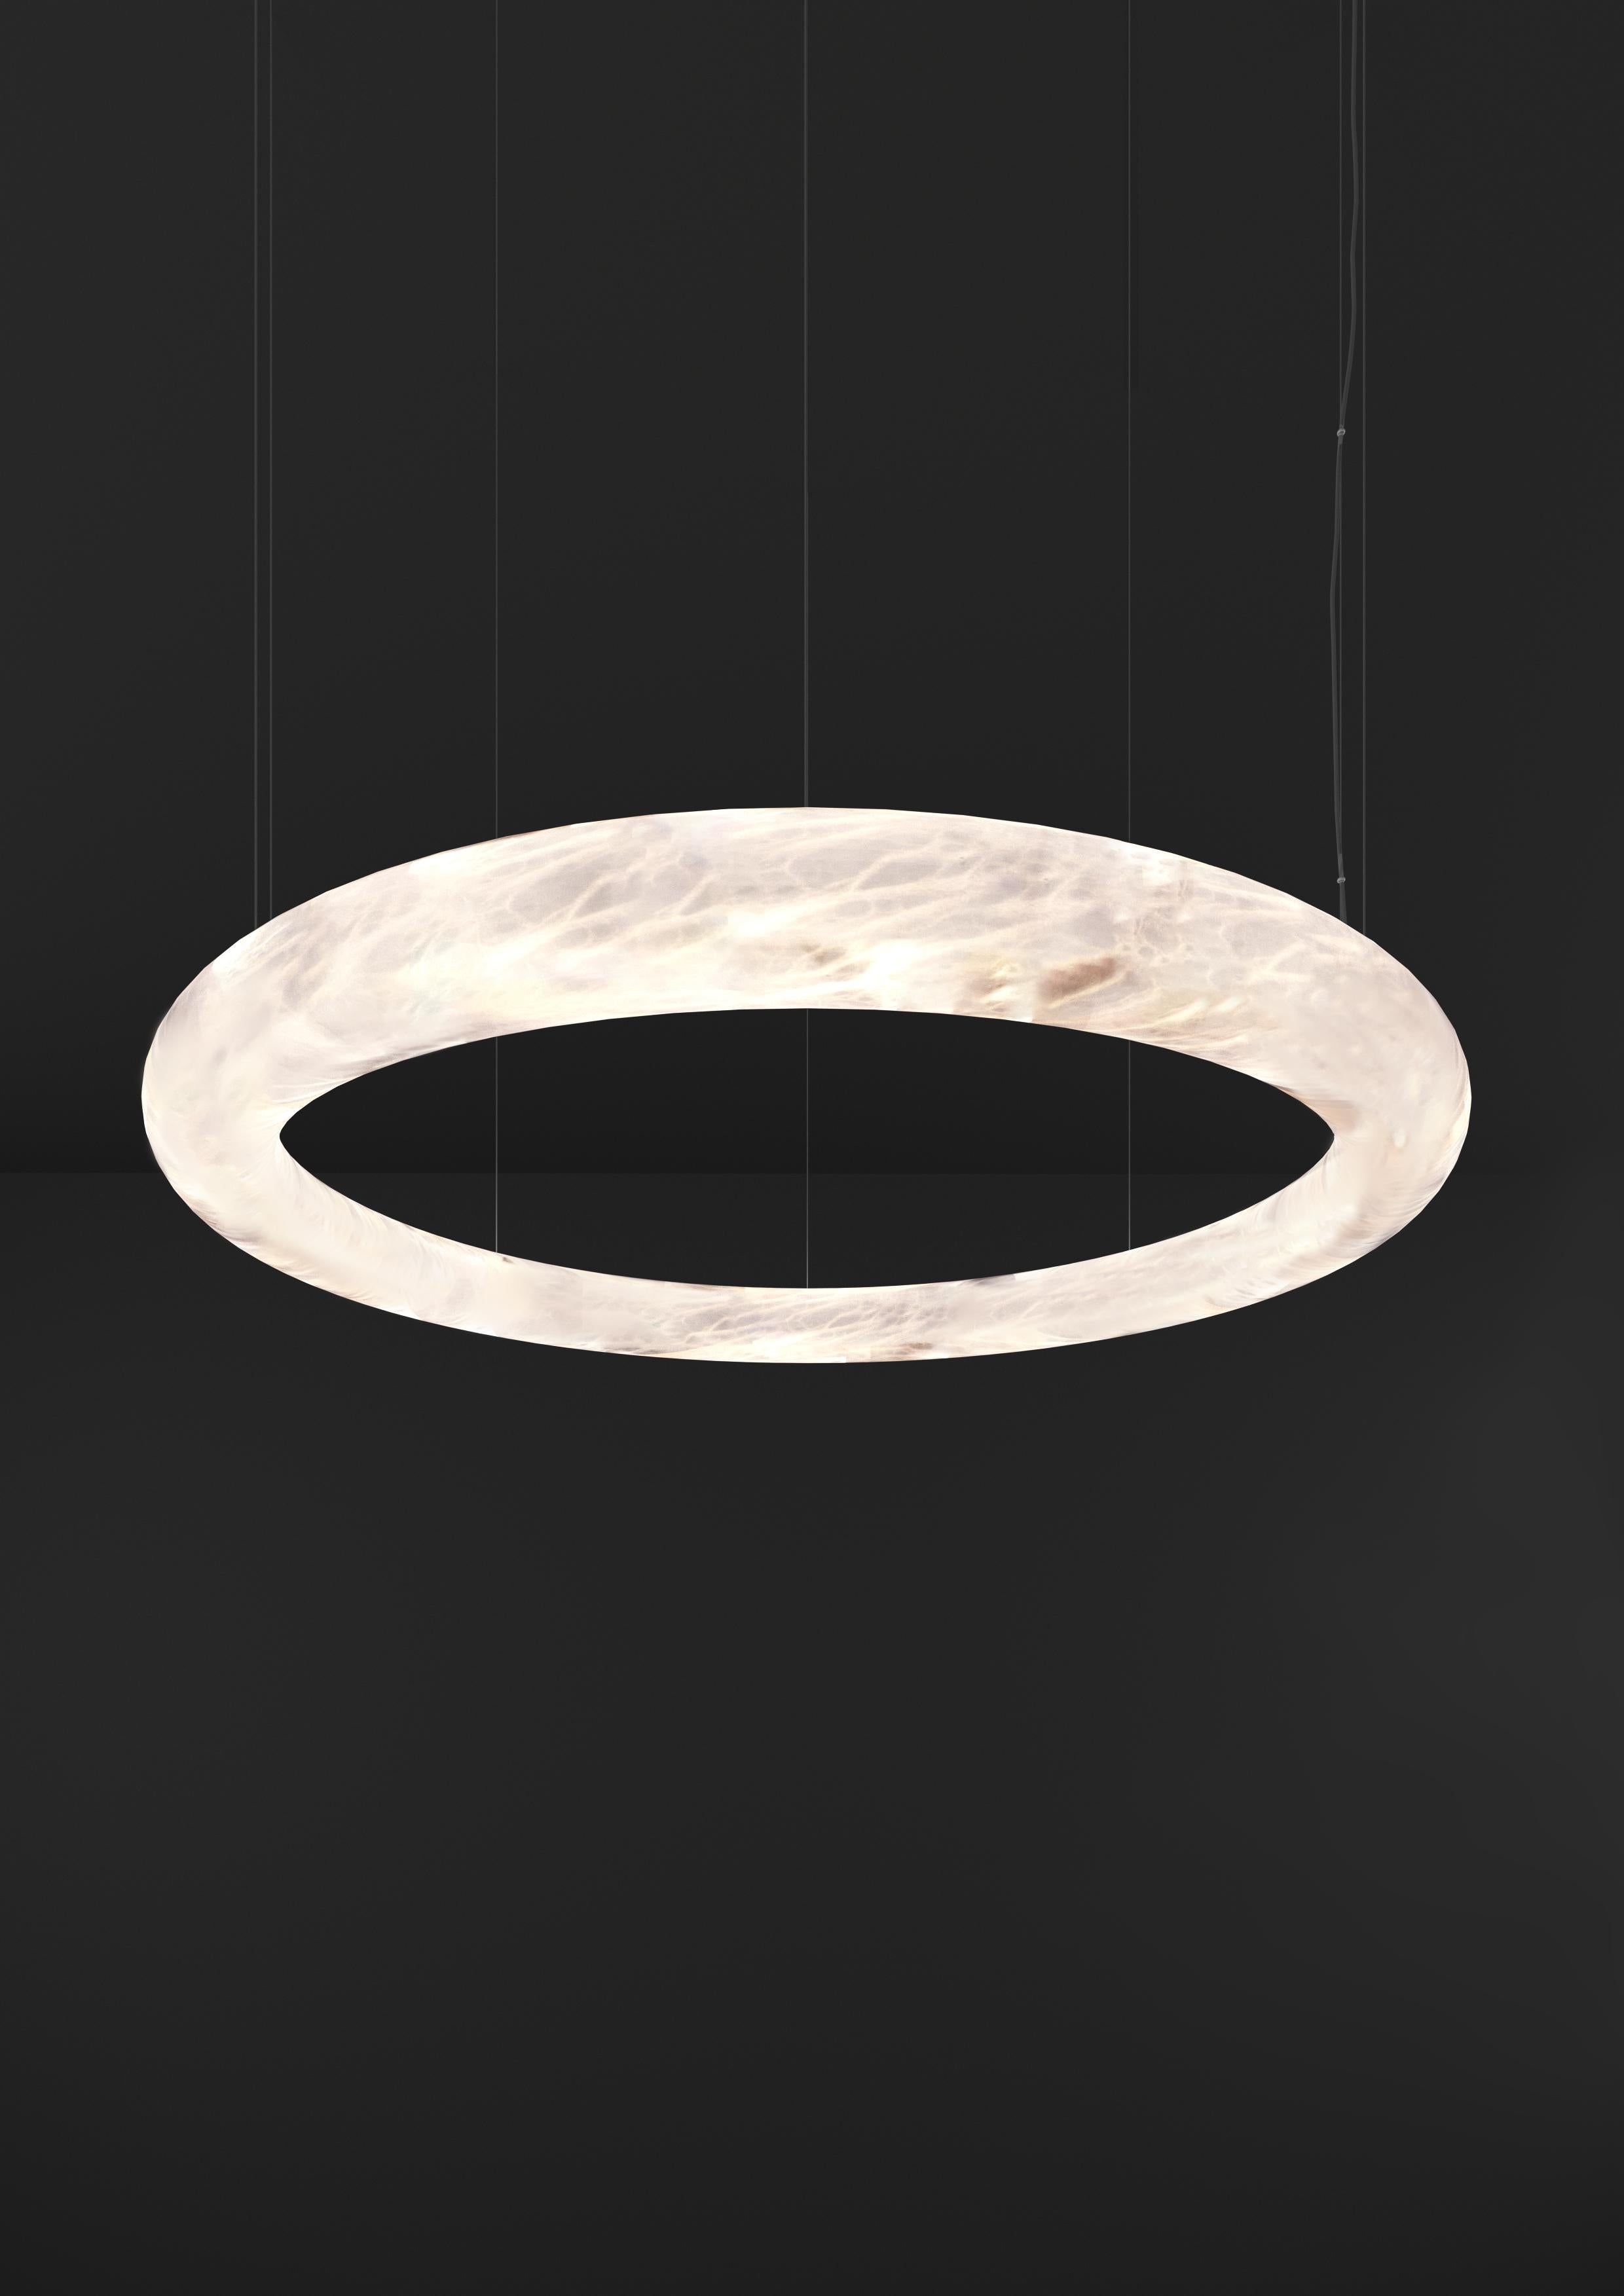 Aura Pendant Light 105 by Alabastro Italiano
Dimensions: Ø 105 x H 8 cm.
Materials: Glass, cable, brushed black metal.
Other finishes available. Please contact us.

2 x Strip LED, 141 Watt 14126 Lumen, 24 V, 3000 K.

All our lamps can be